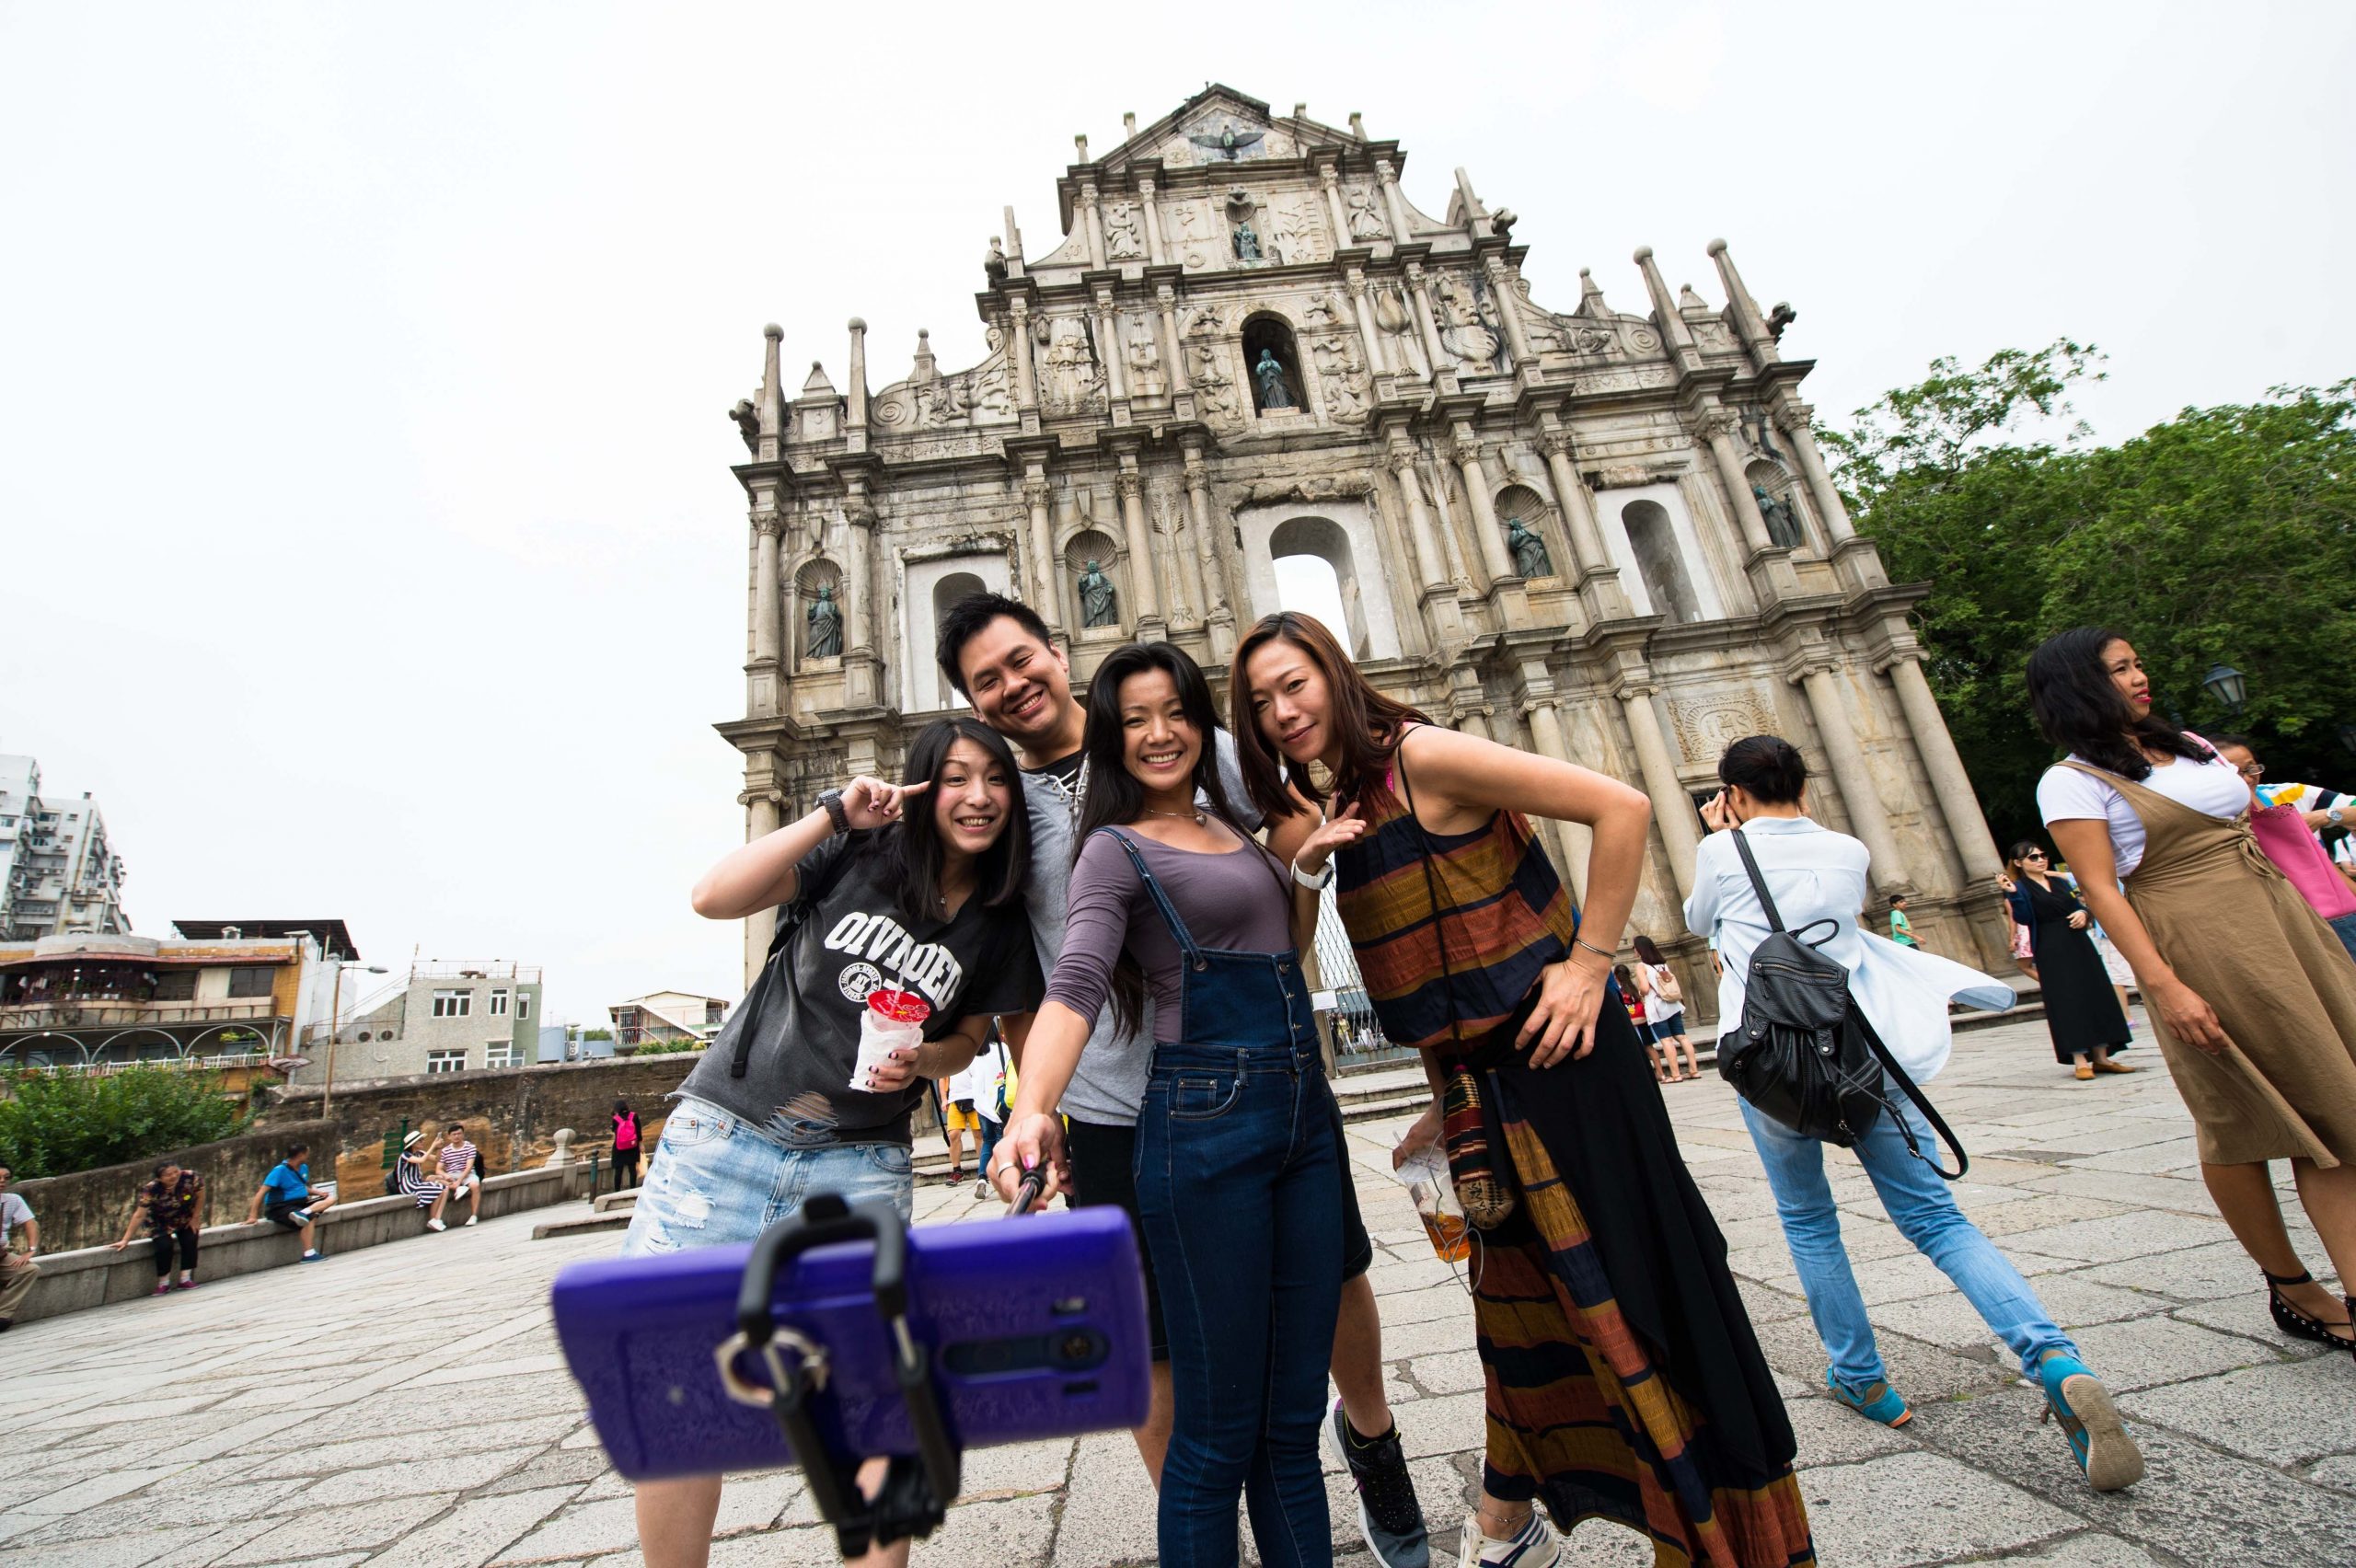 Macau receives more than 13 million visitors from January to May